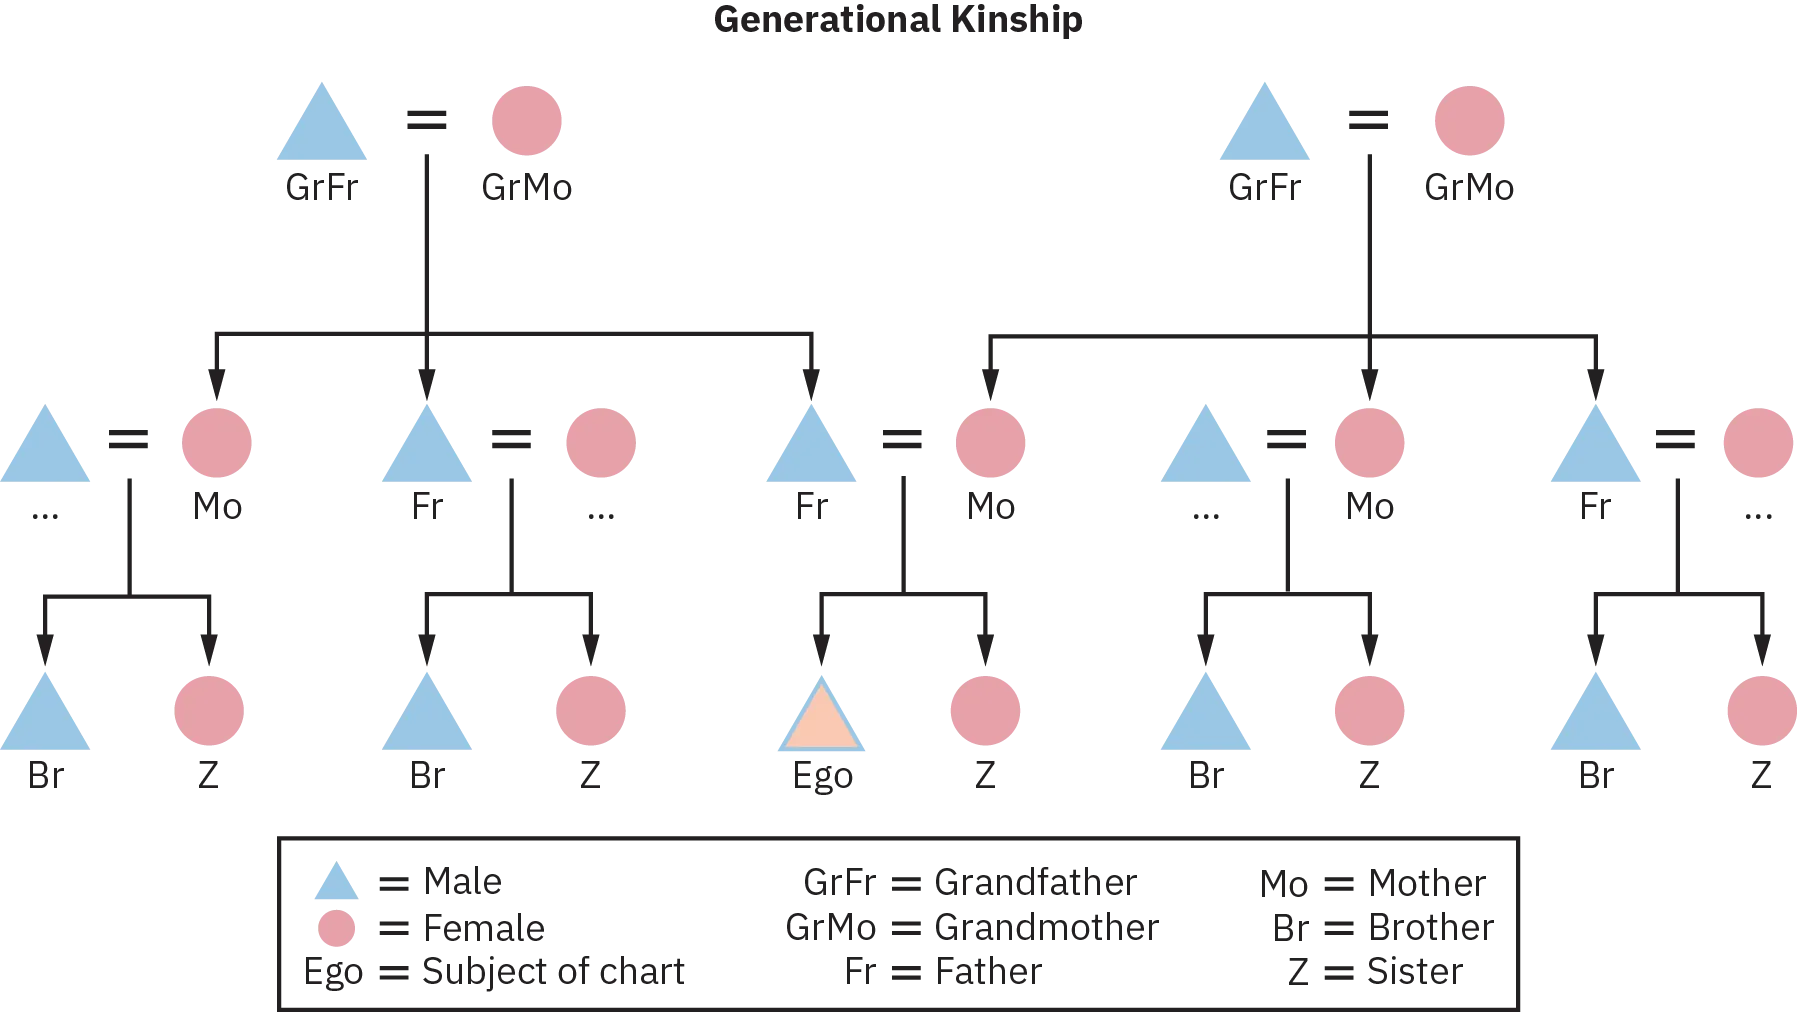 A Generational Kinship chart of three generations, starting from two sets of grandparents, as grandfather and grandmother respectively, their children, including father and mother, and their children being designated as brother and sister.